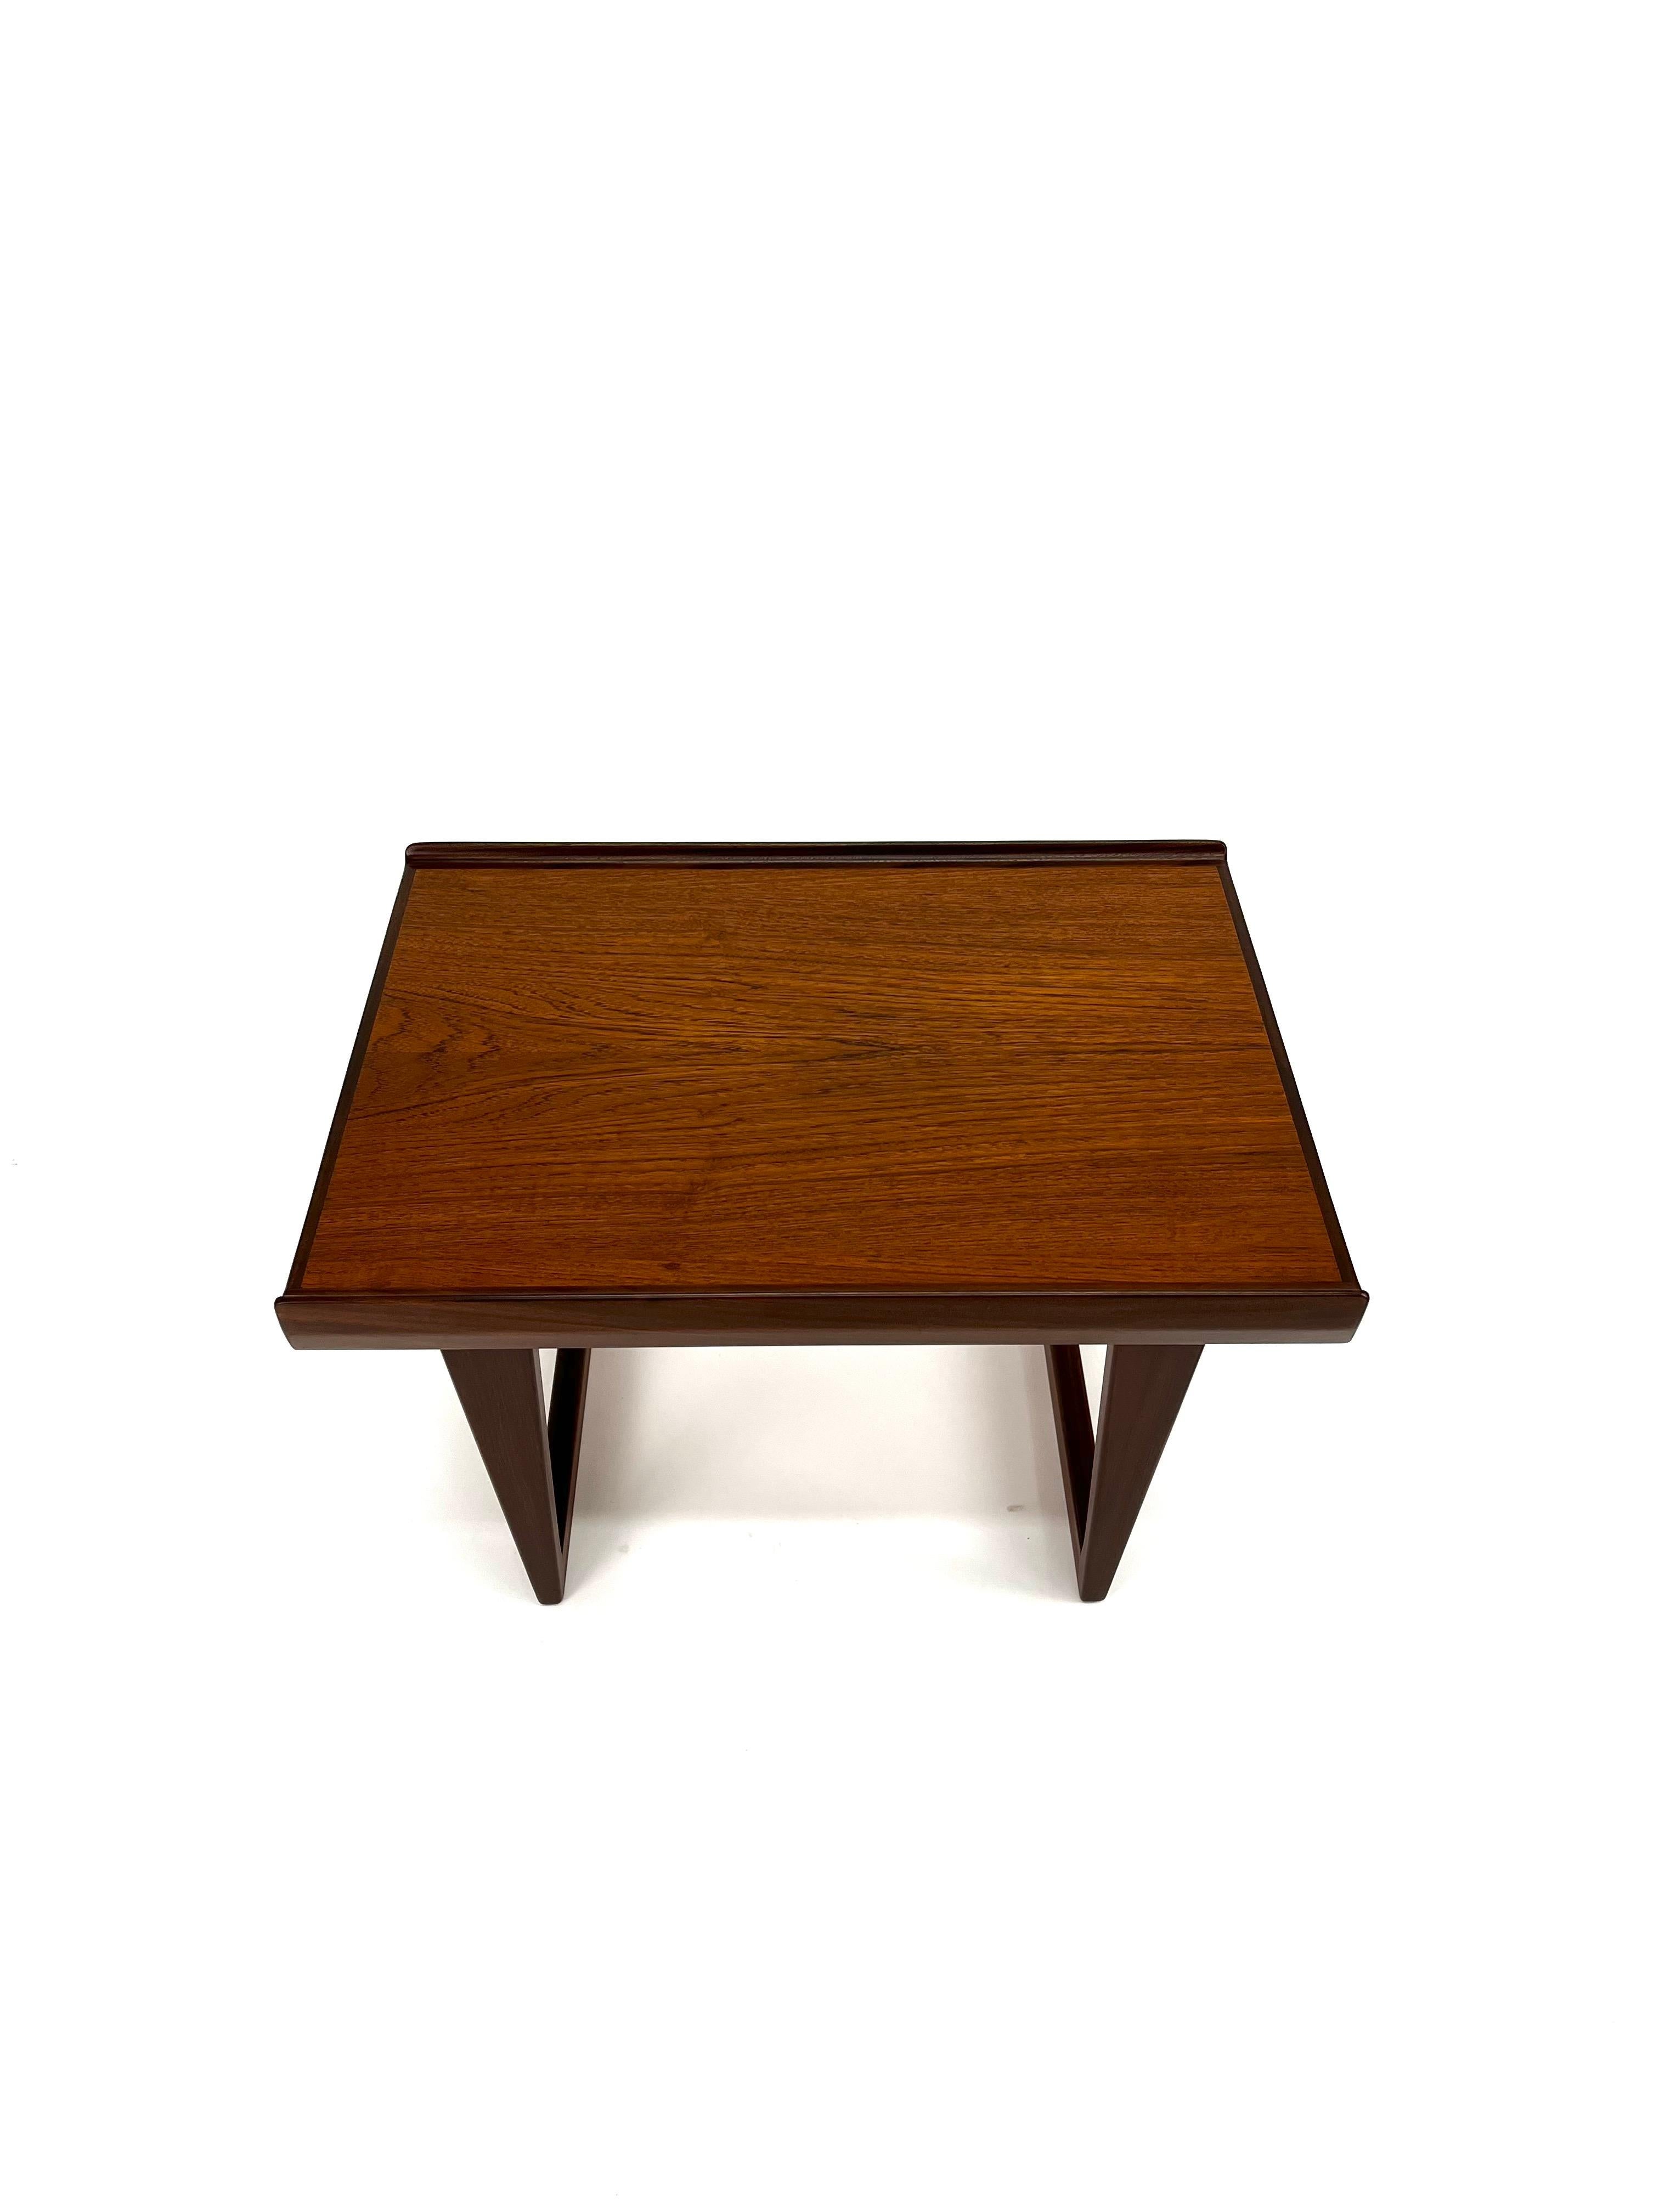 As architecturally fascinating as it is aesthetically pleasing, this iconic table, designed by Peter Løvig Nielsen in the early 60's. Featuring turned edges built of solid teak with exceptional woodgrains set atop a set of sled legs, this side table